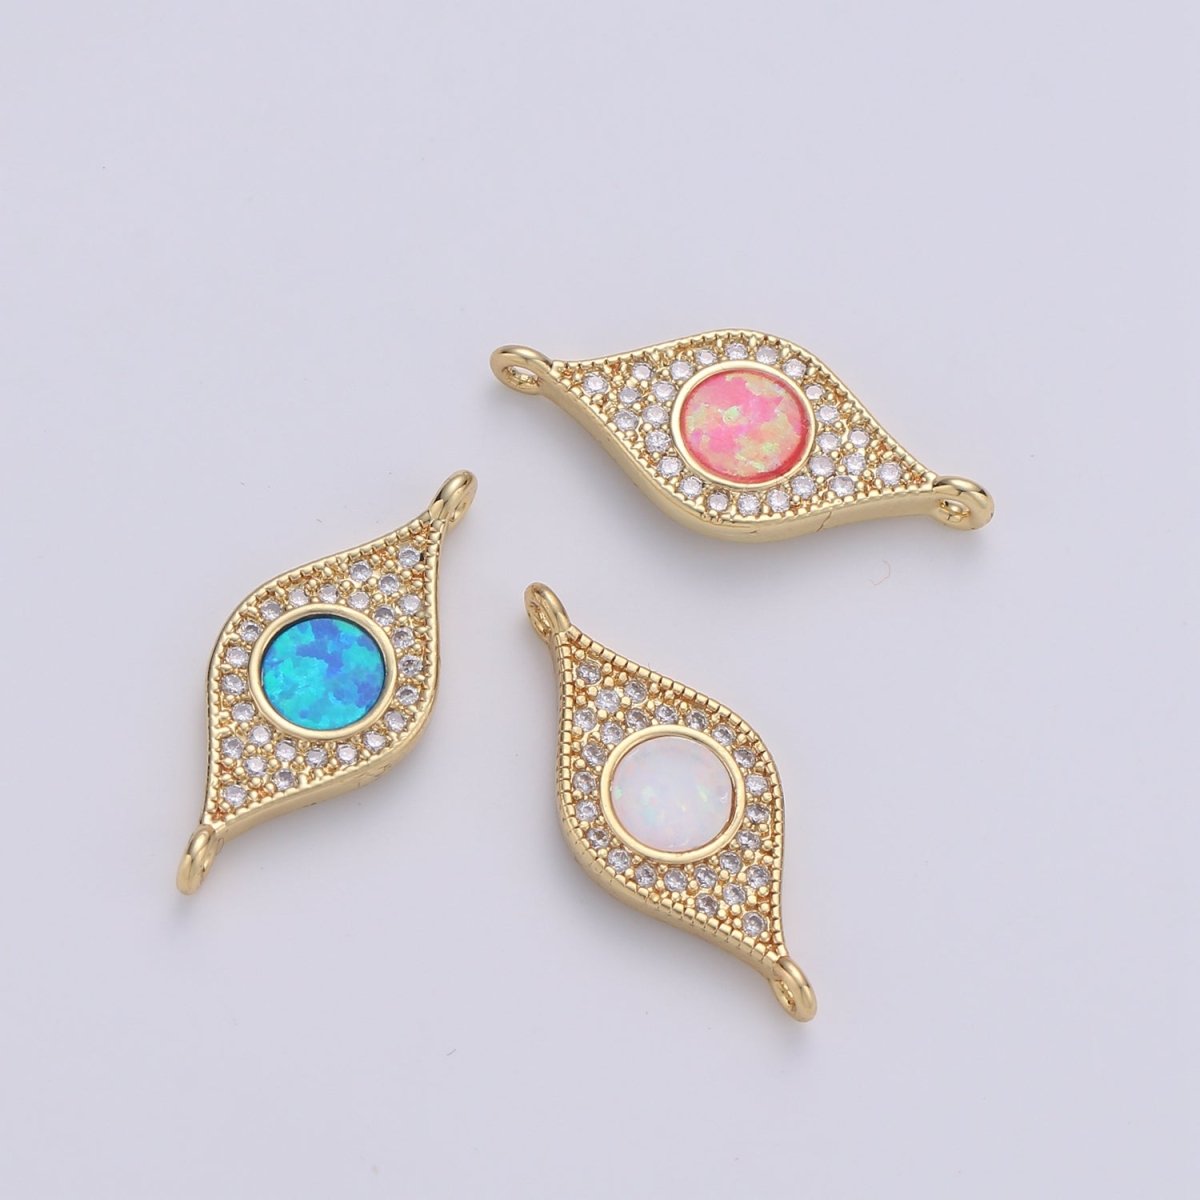 Dainty Opal Bracelet Connector Gold Evil Eye Charm 14k Gold Fill Peacock Feather Charm Connector for Bracelet Necklace Charm Component F-491 F-492 F-493 - DLUXCA